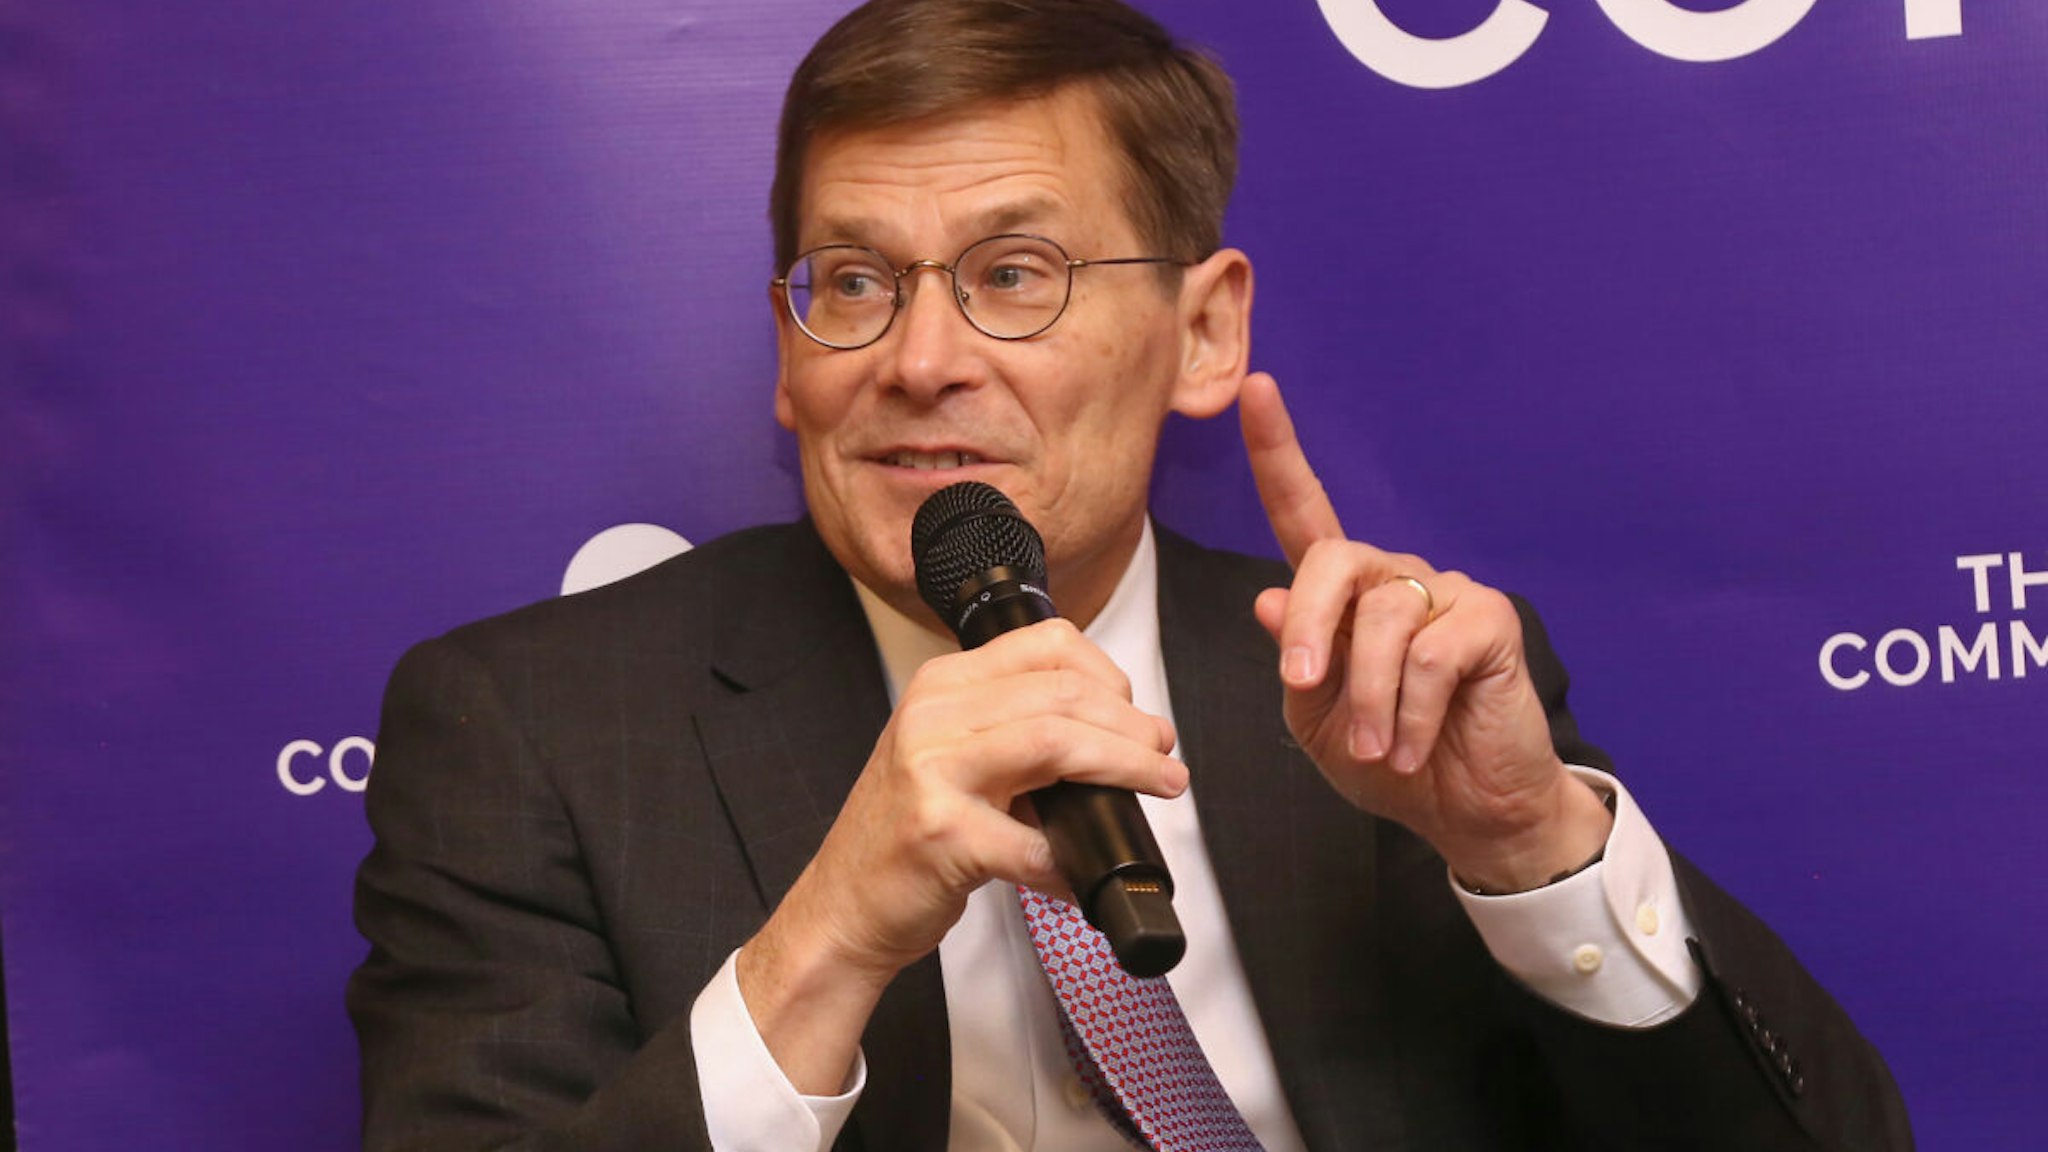 Michael Morell attends The Common Good is pleased to present an important off-the-record conversation with Michael Morell, former Acting Director & Deputy of the CIA, with Jeh Johnson, former Secretary of Homeland Security on March 1, 2018 in New York City.